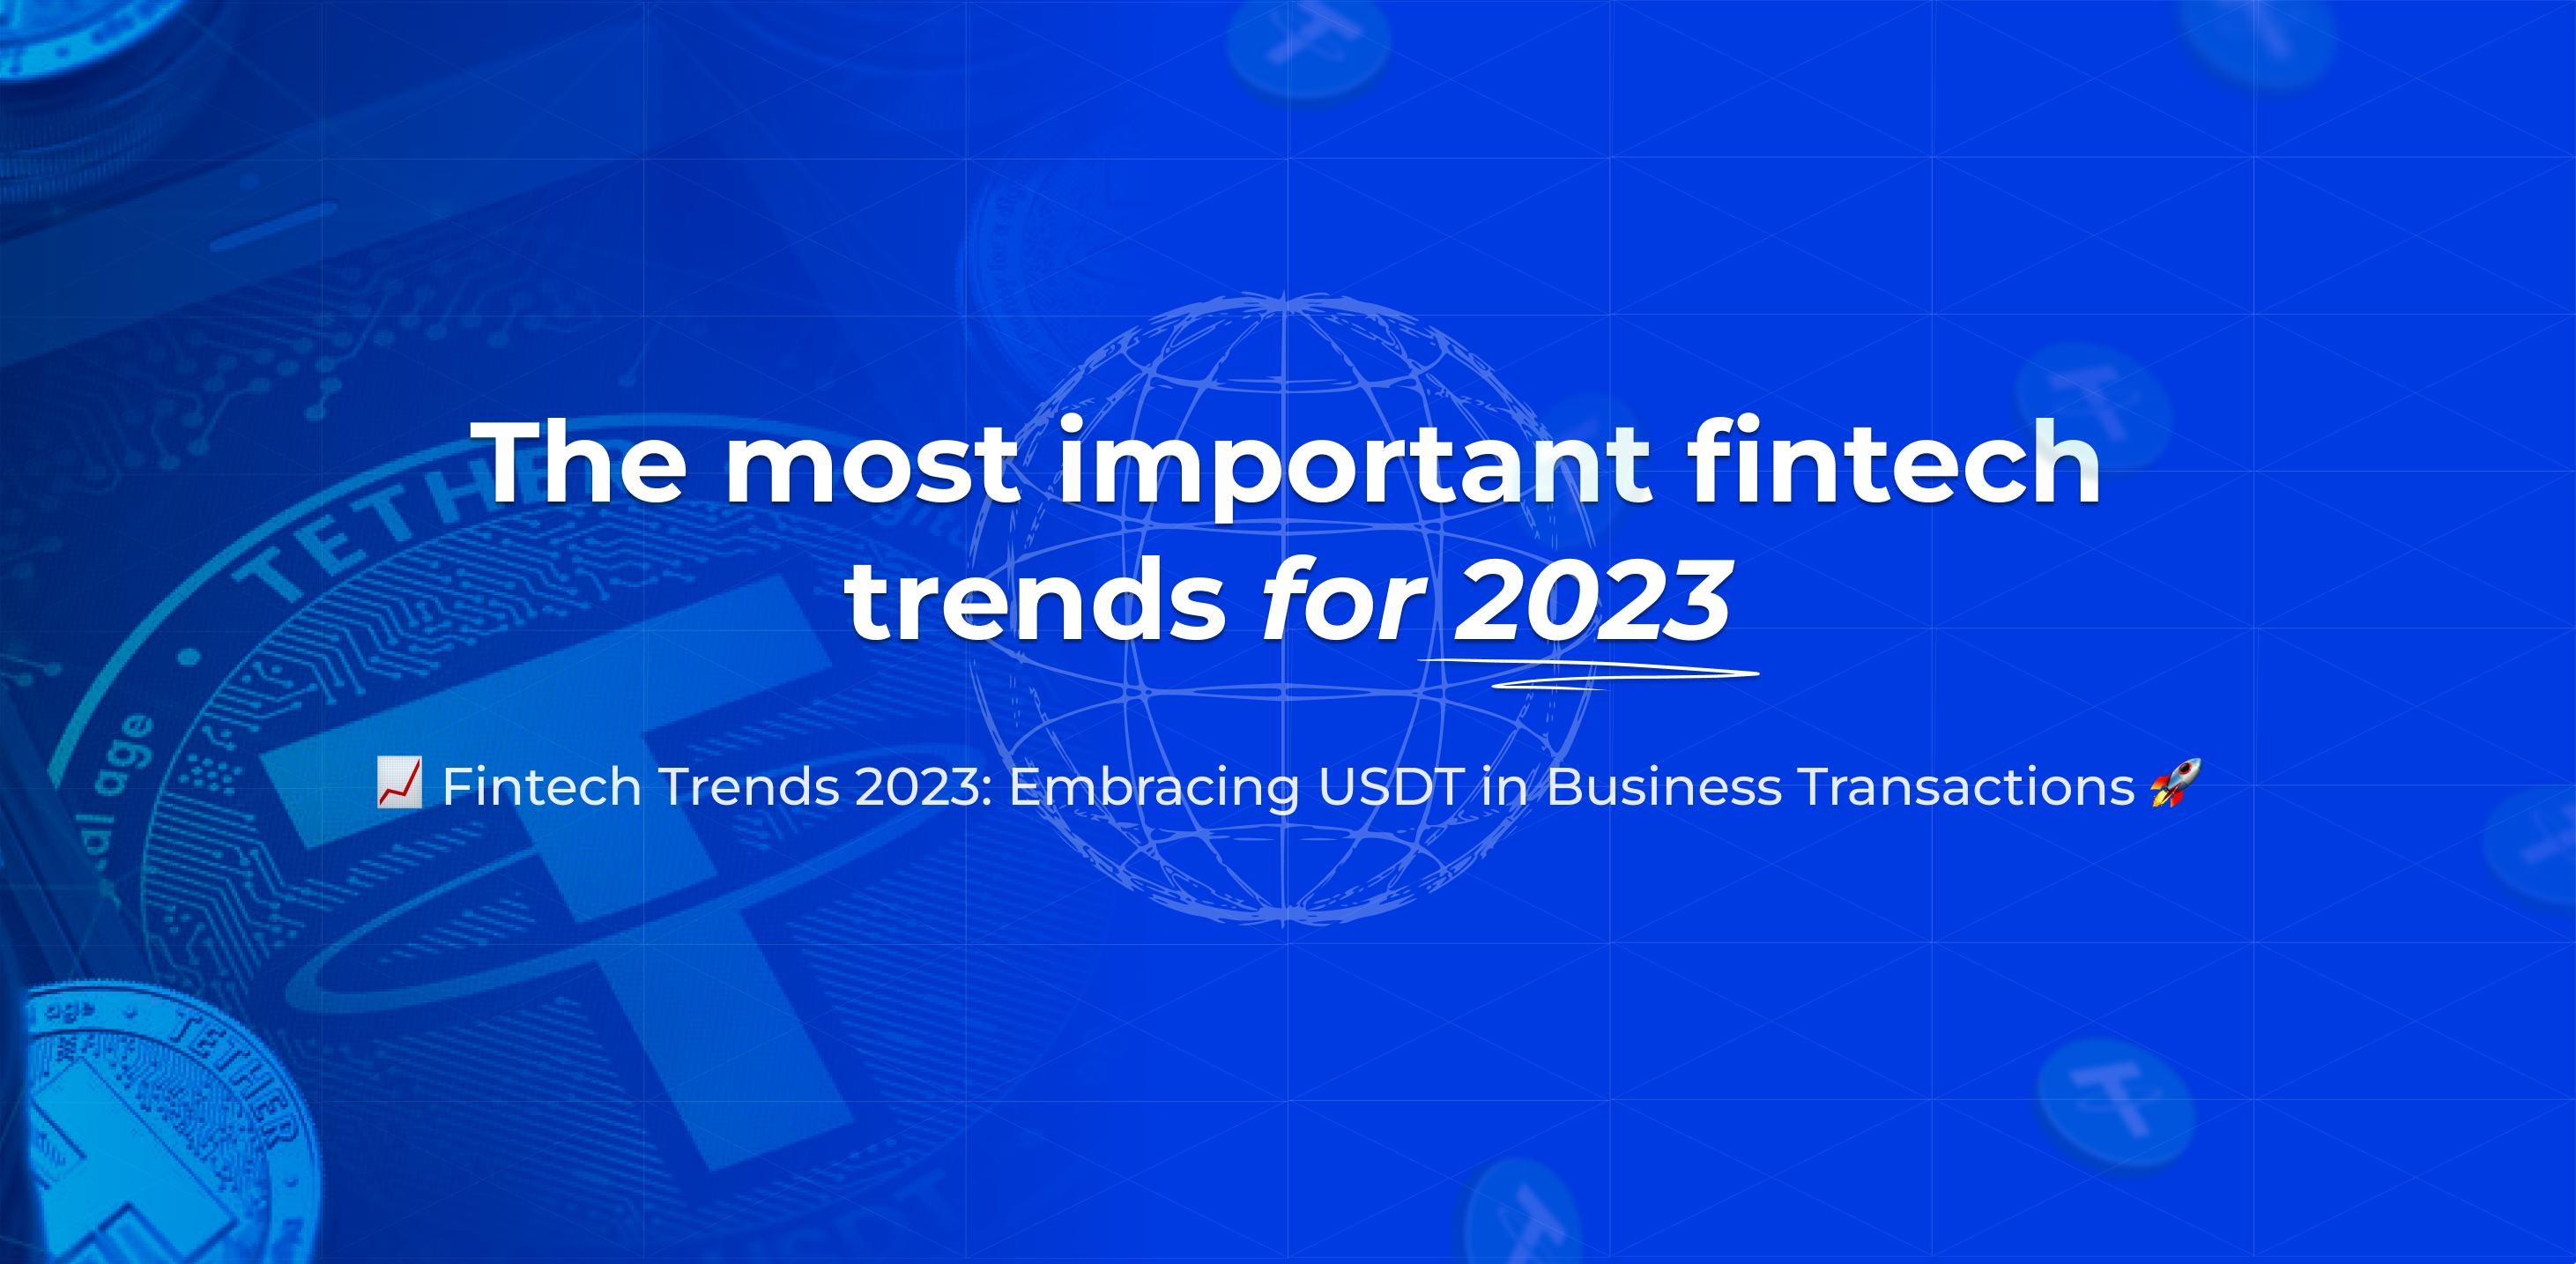 The most important fintech trends for 2023